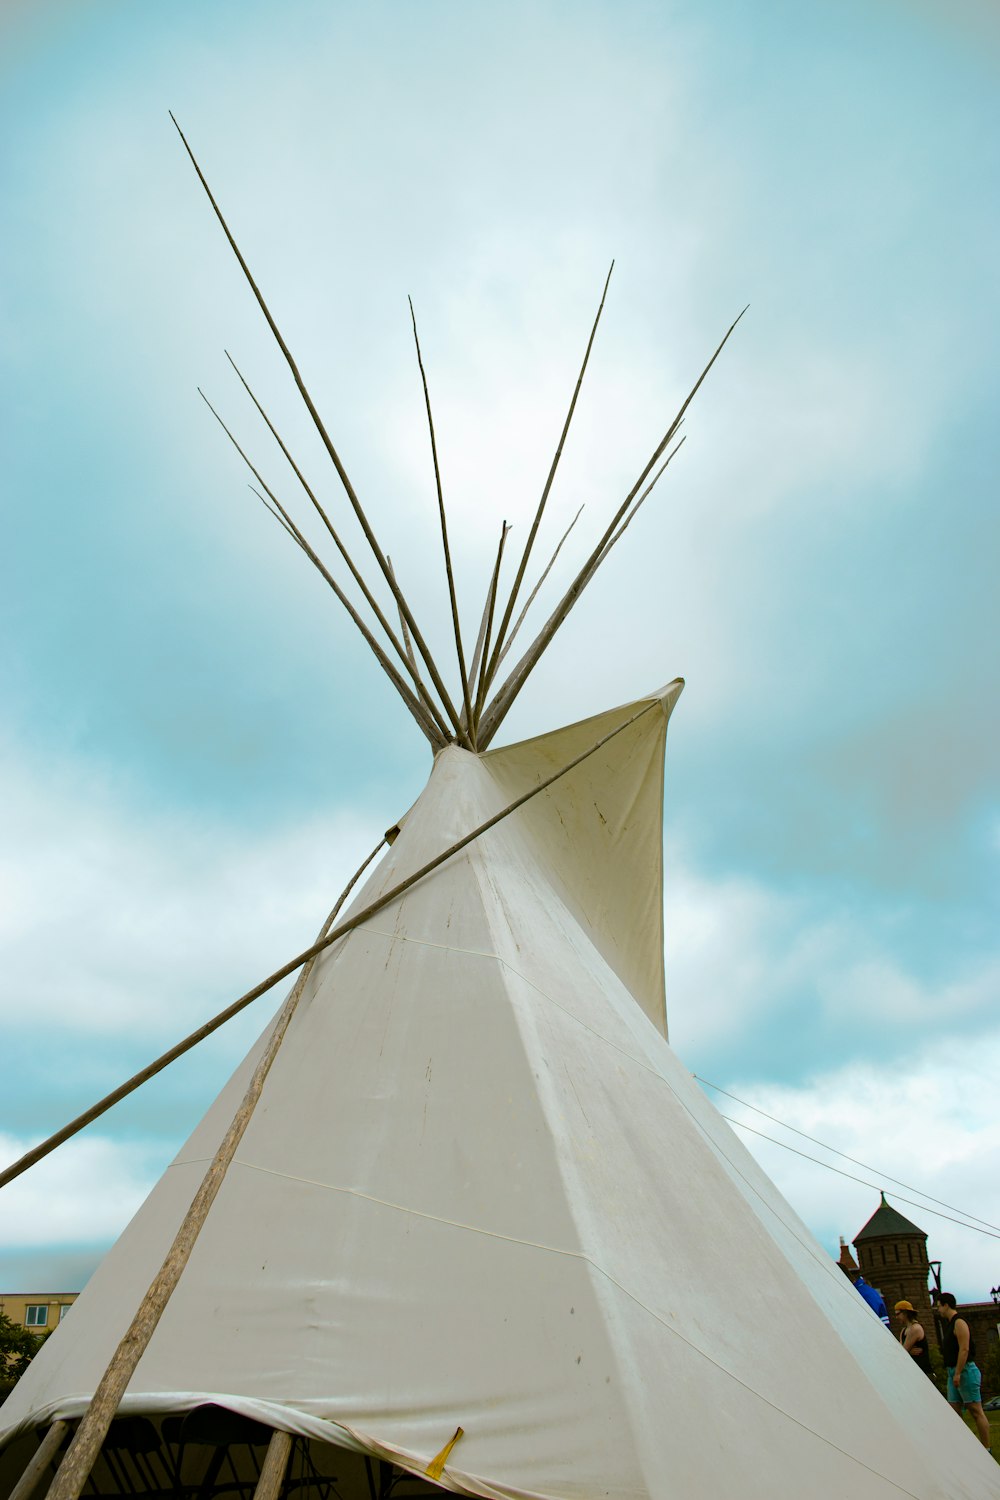 a teepee with sticks sticking out of it